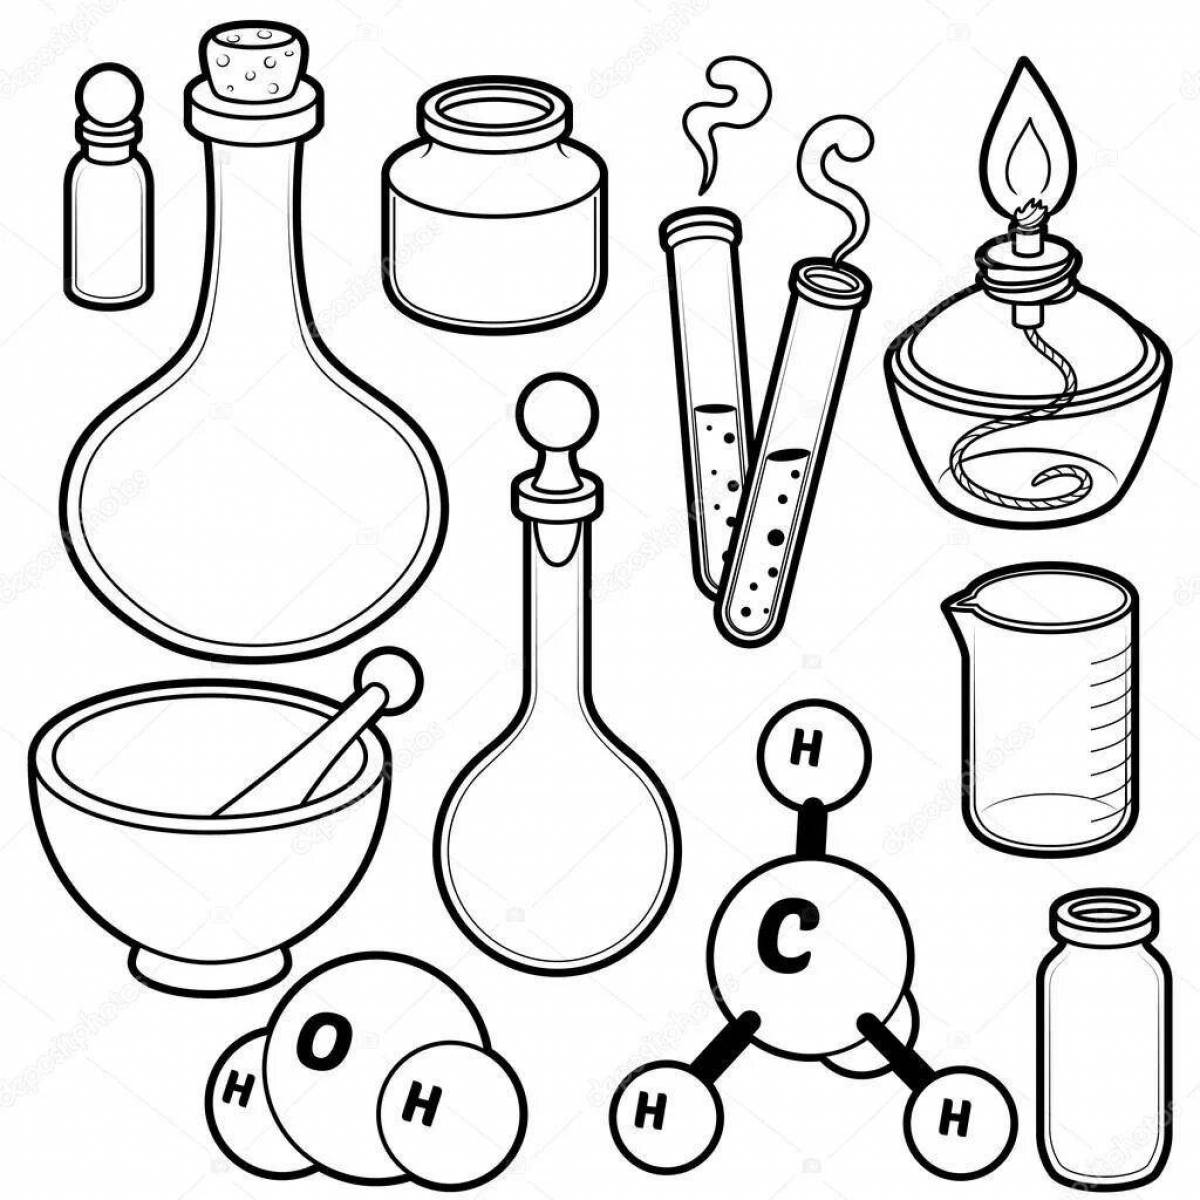 Shiny chemical flasks coloring book